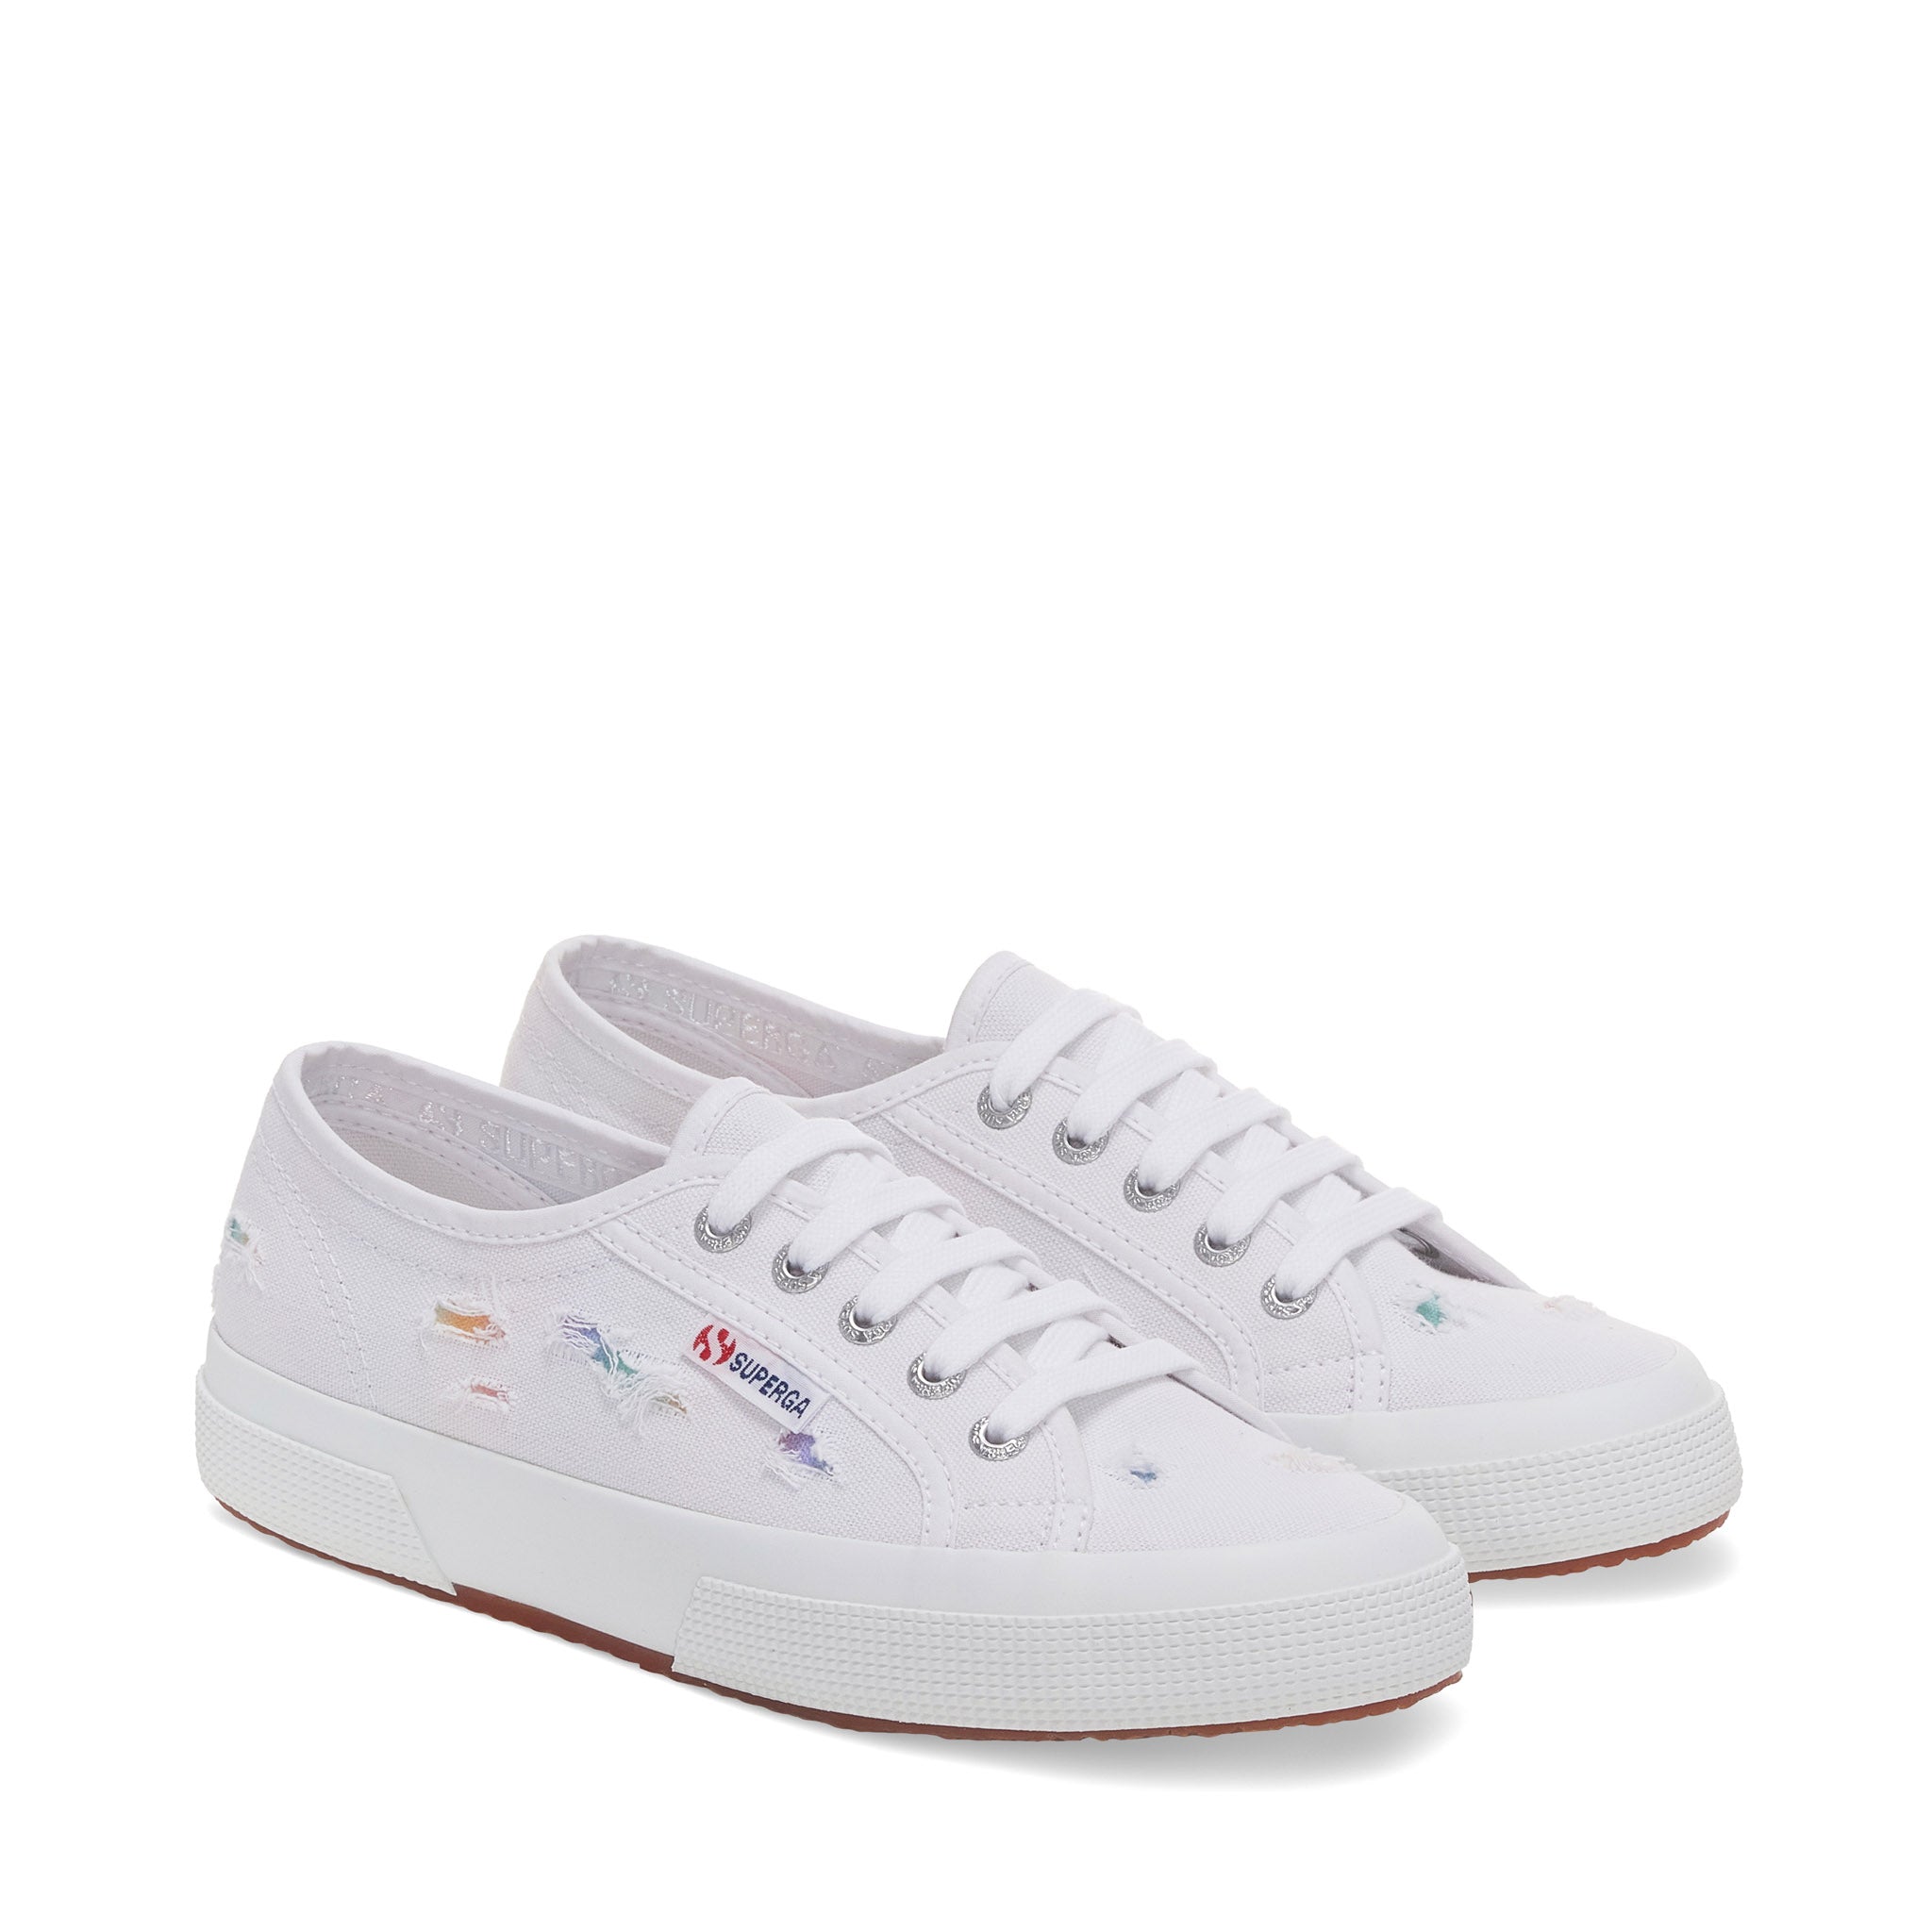 Superga 2750 Ripped Multicolor Cotton Sneakers - White Multicolor Shaded Print. Front view.